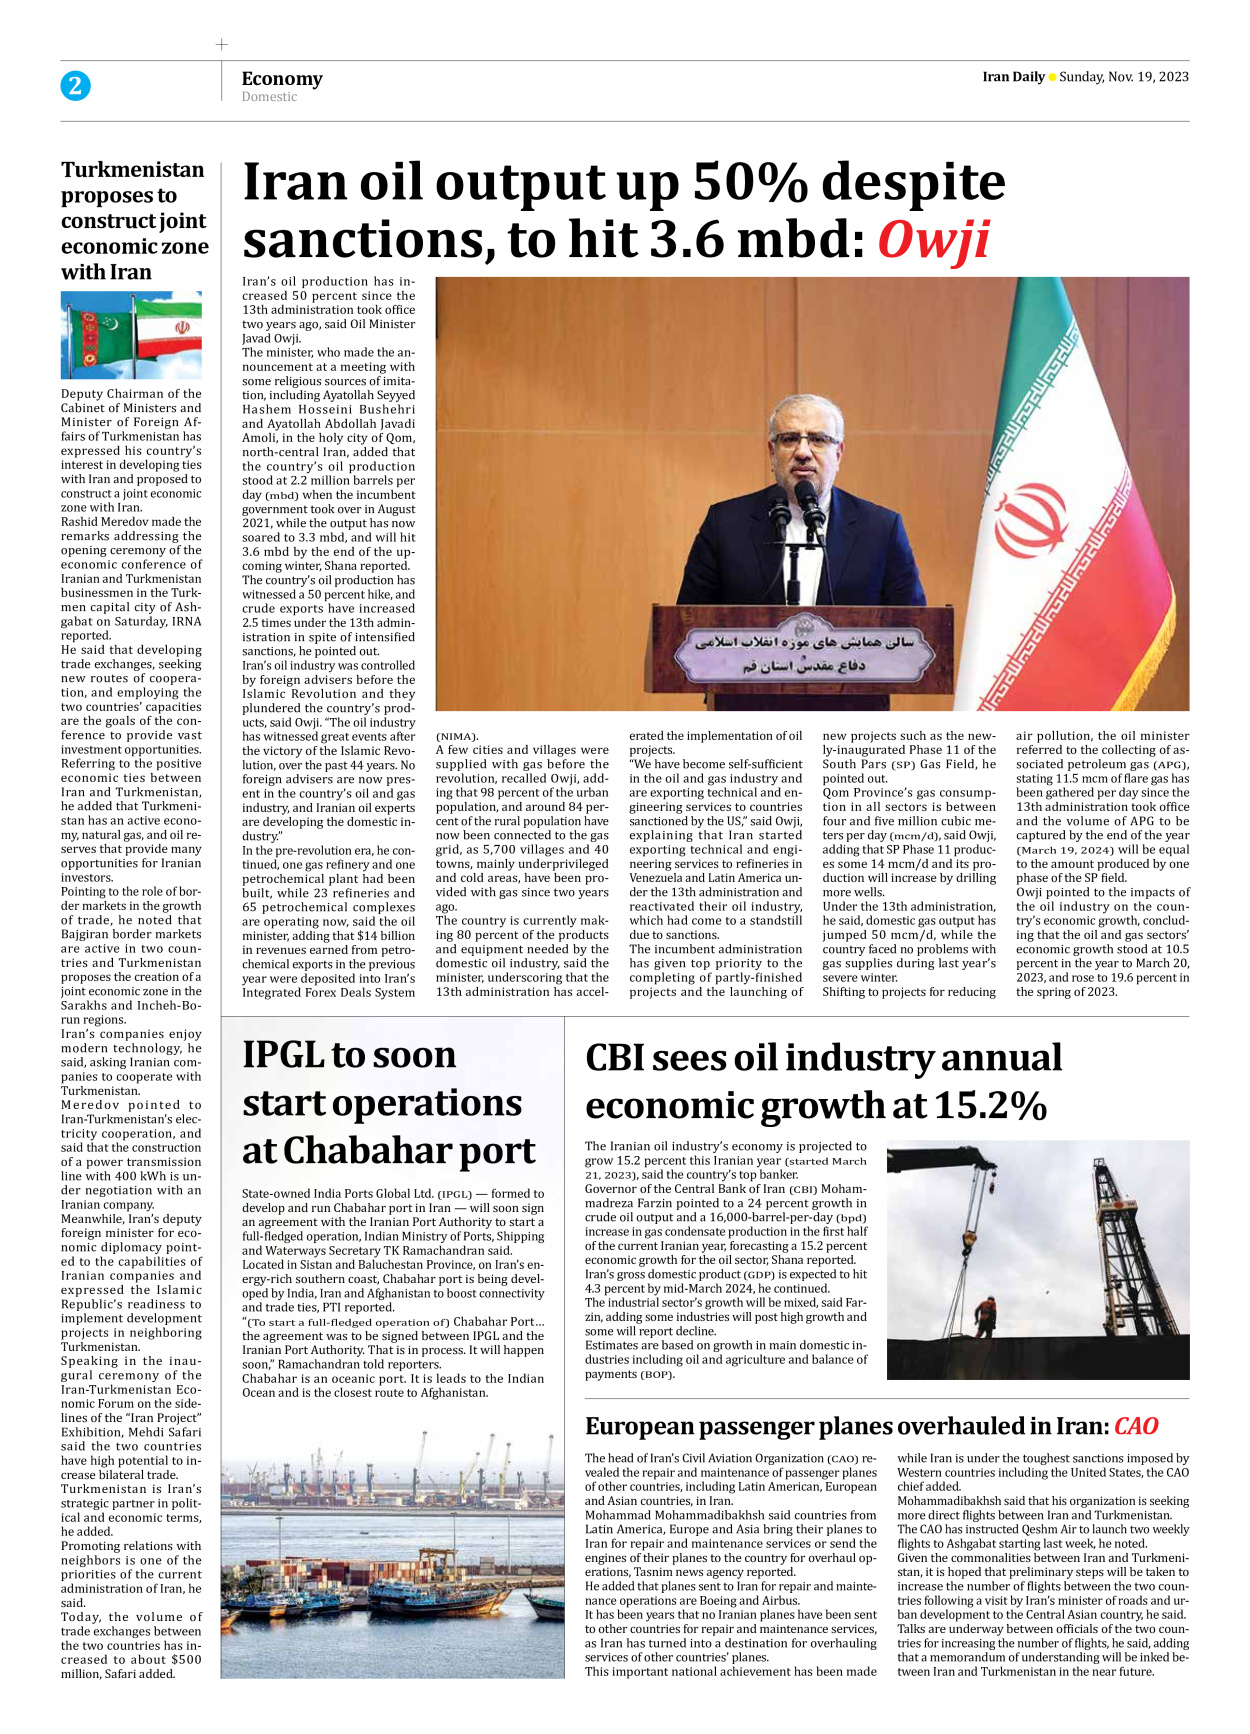 Iran Daily - Number Seven Thousand Four Hundred and Thirty Eight - 19 November 2023 - Page 2